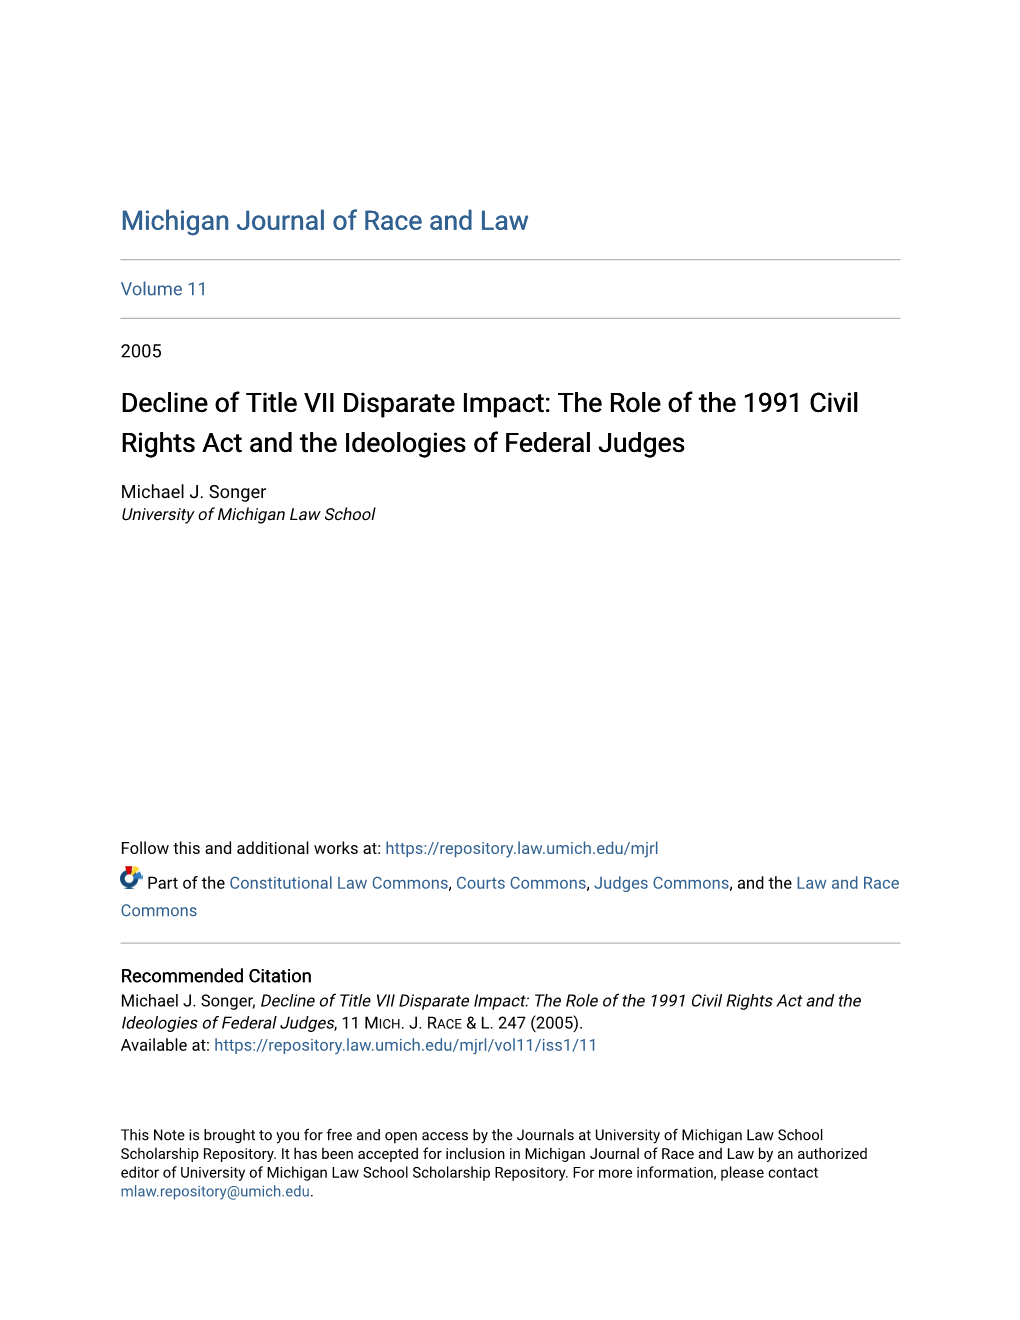 Decline of Title VII Disparate Impact: the Role of the 1991 Civil Rights Act and the Ideologies of Federal Judges